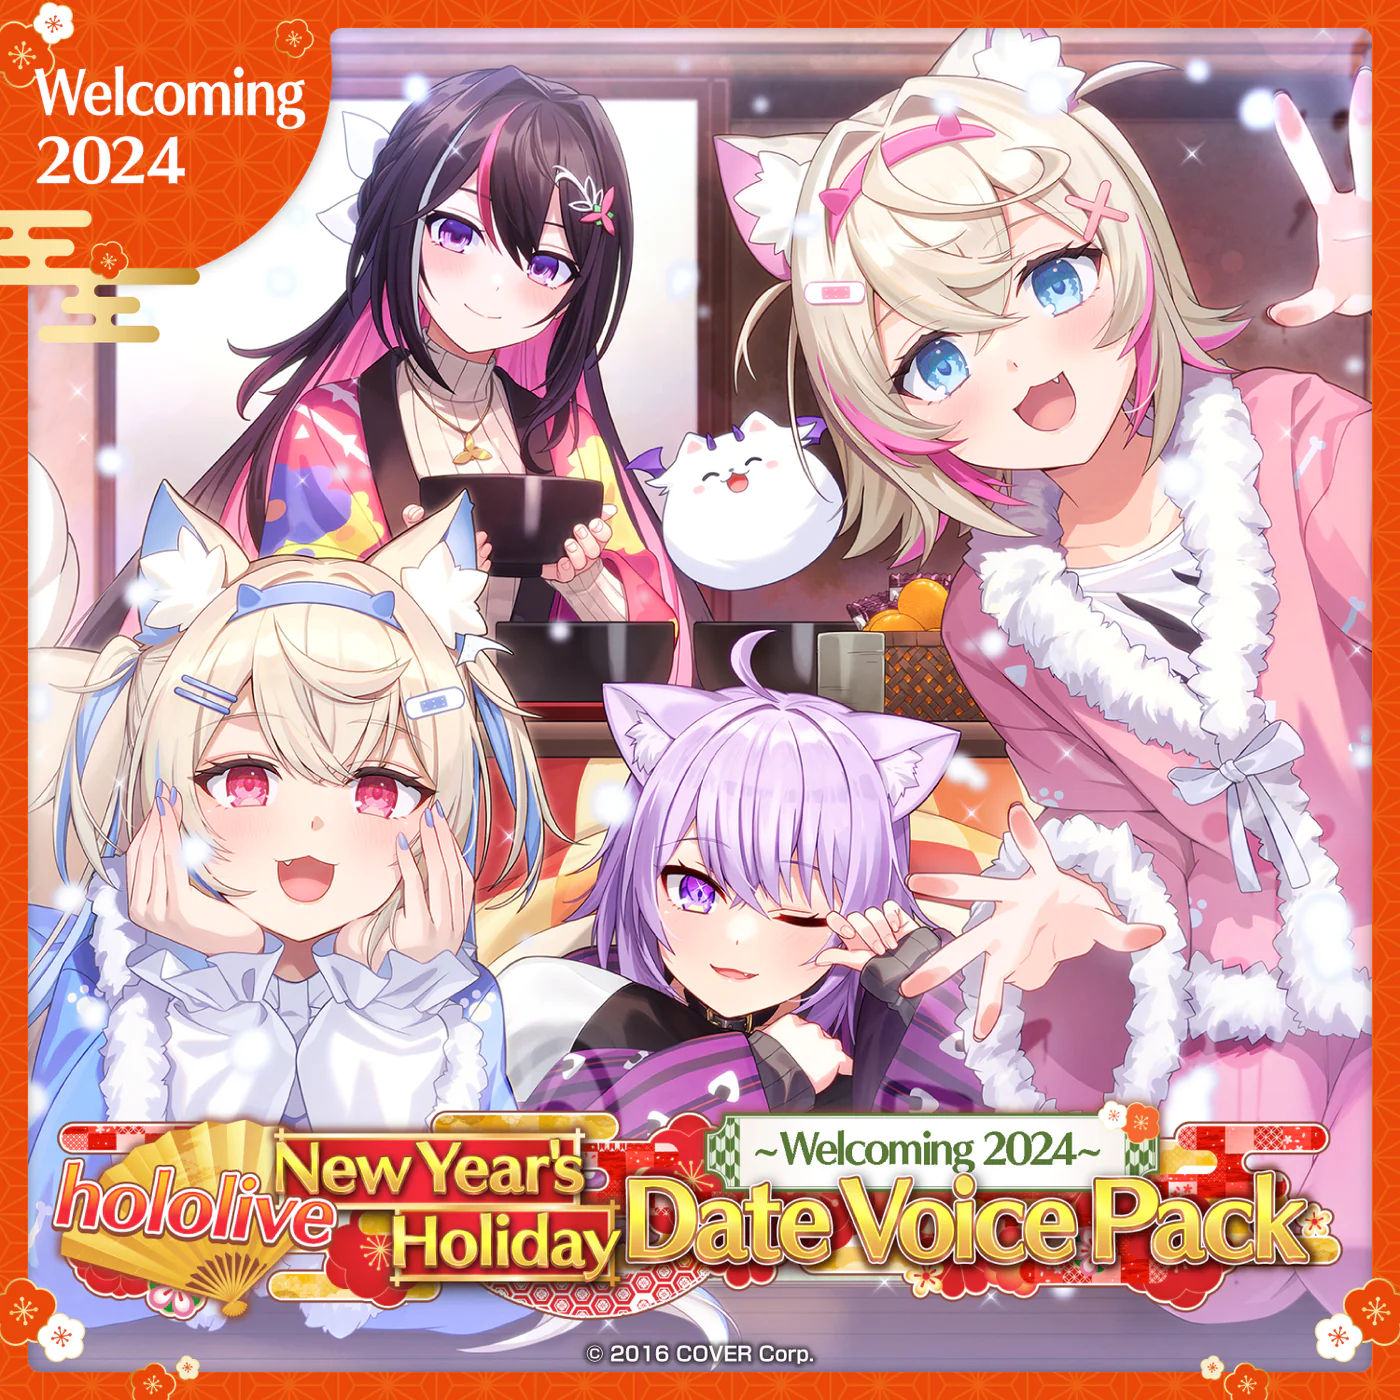 [In Stock] hololive New Year's Holiday Date Voice Pack ~Welcoming 2024~ Japan